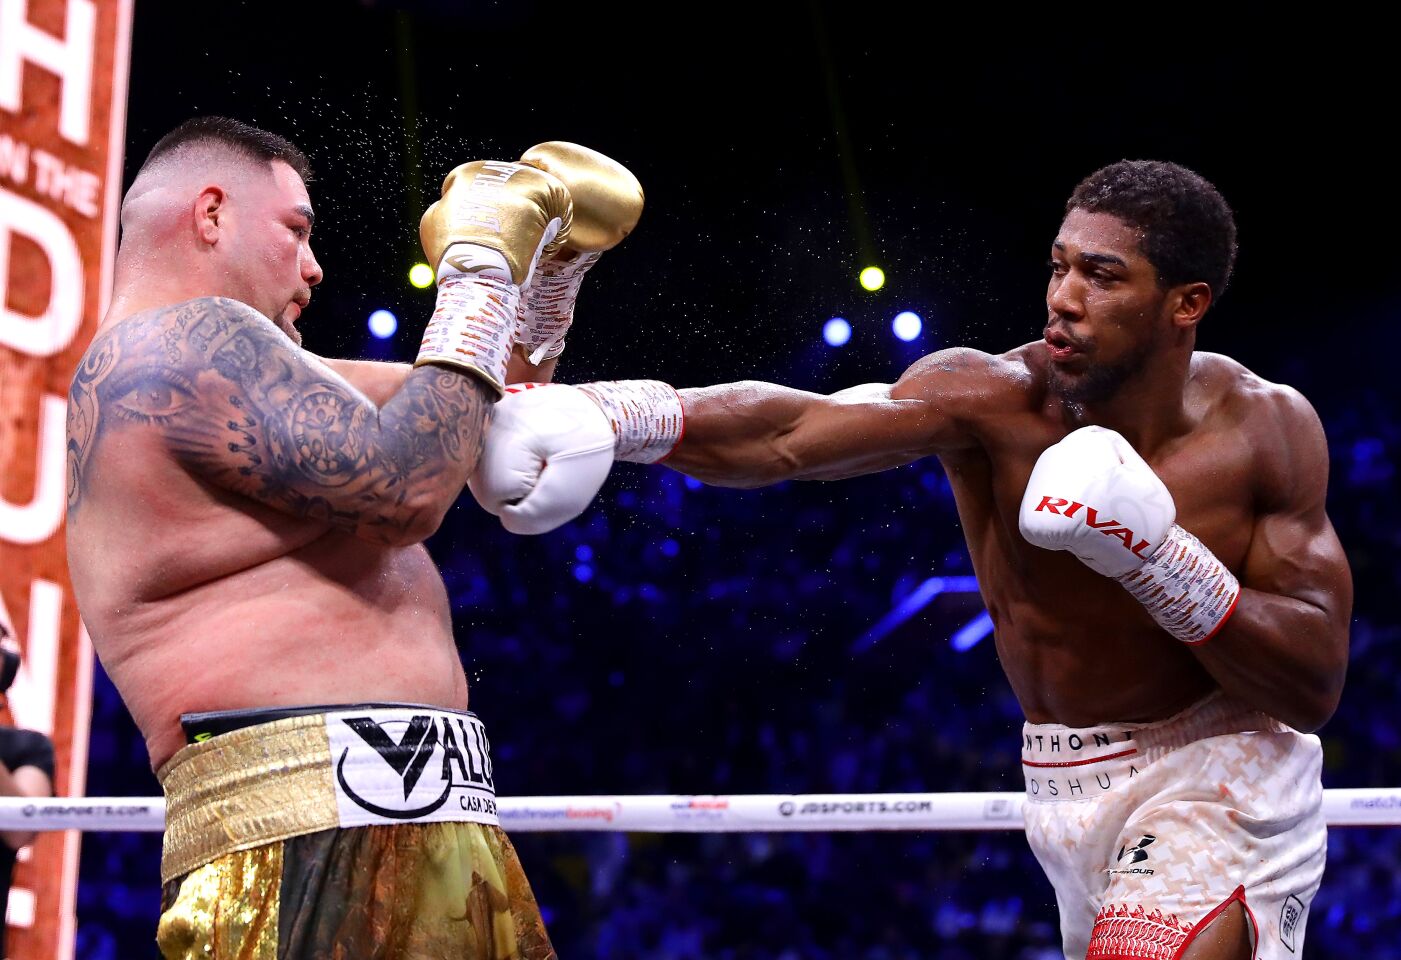 Anthony Joshua throws a right hand at Andy Ruiz Jr. during a heavyweight title fight on Dec. 7 in Diriuah, Saudi Arabia.